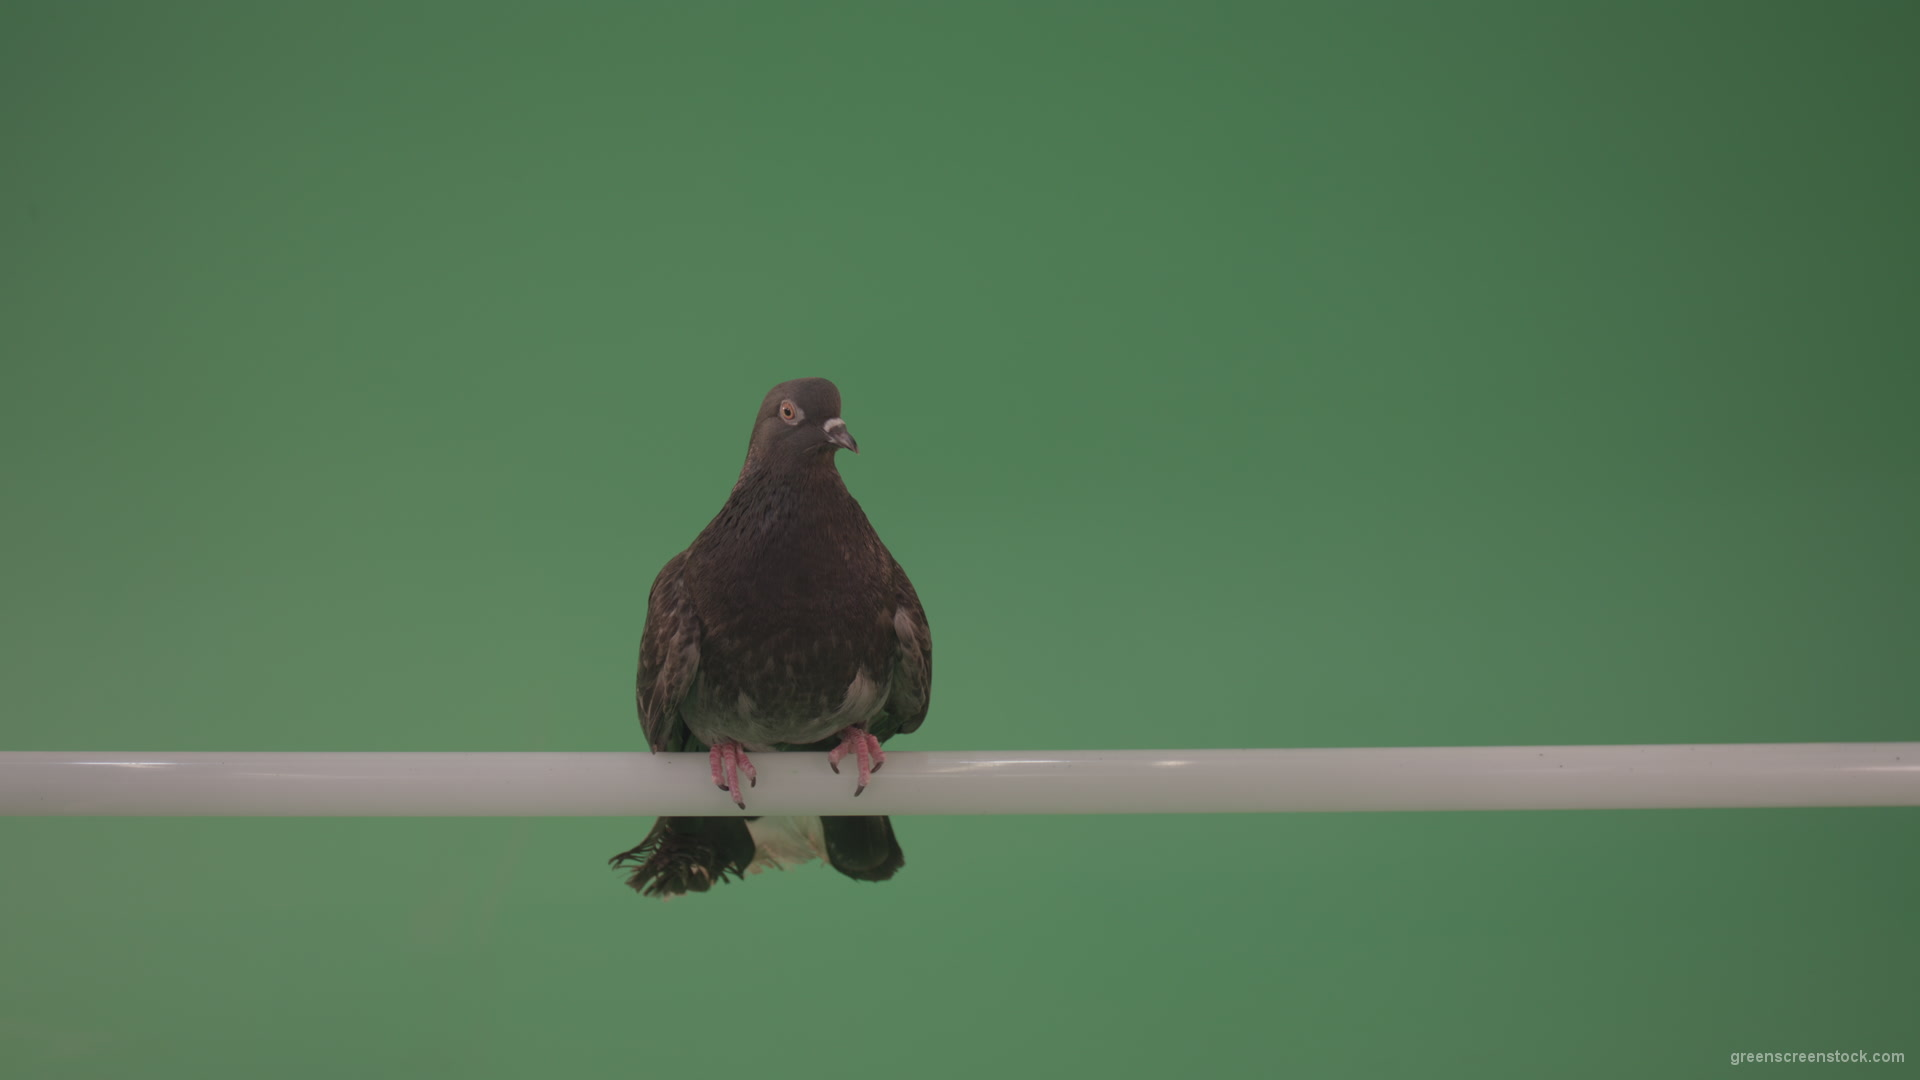 City-bird-of-a-dove-sitting-on-a-branch-in-the-city-isolated-on-green-background_007 Green Screen Stock